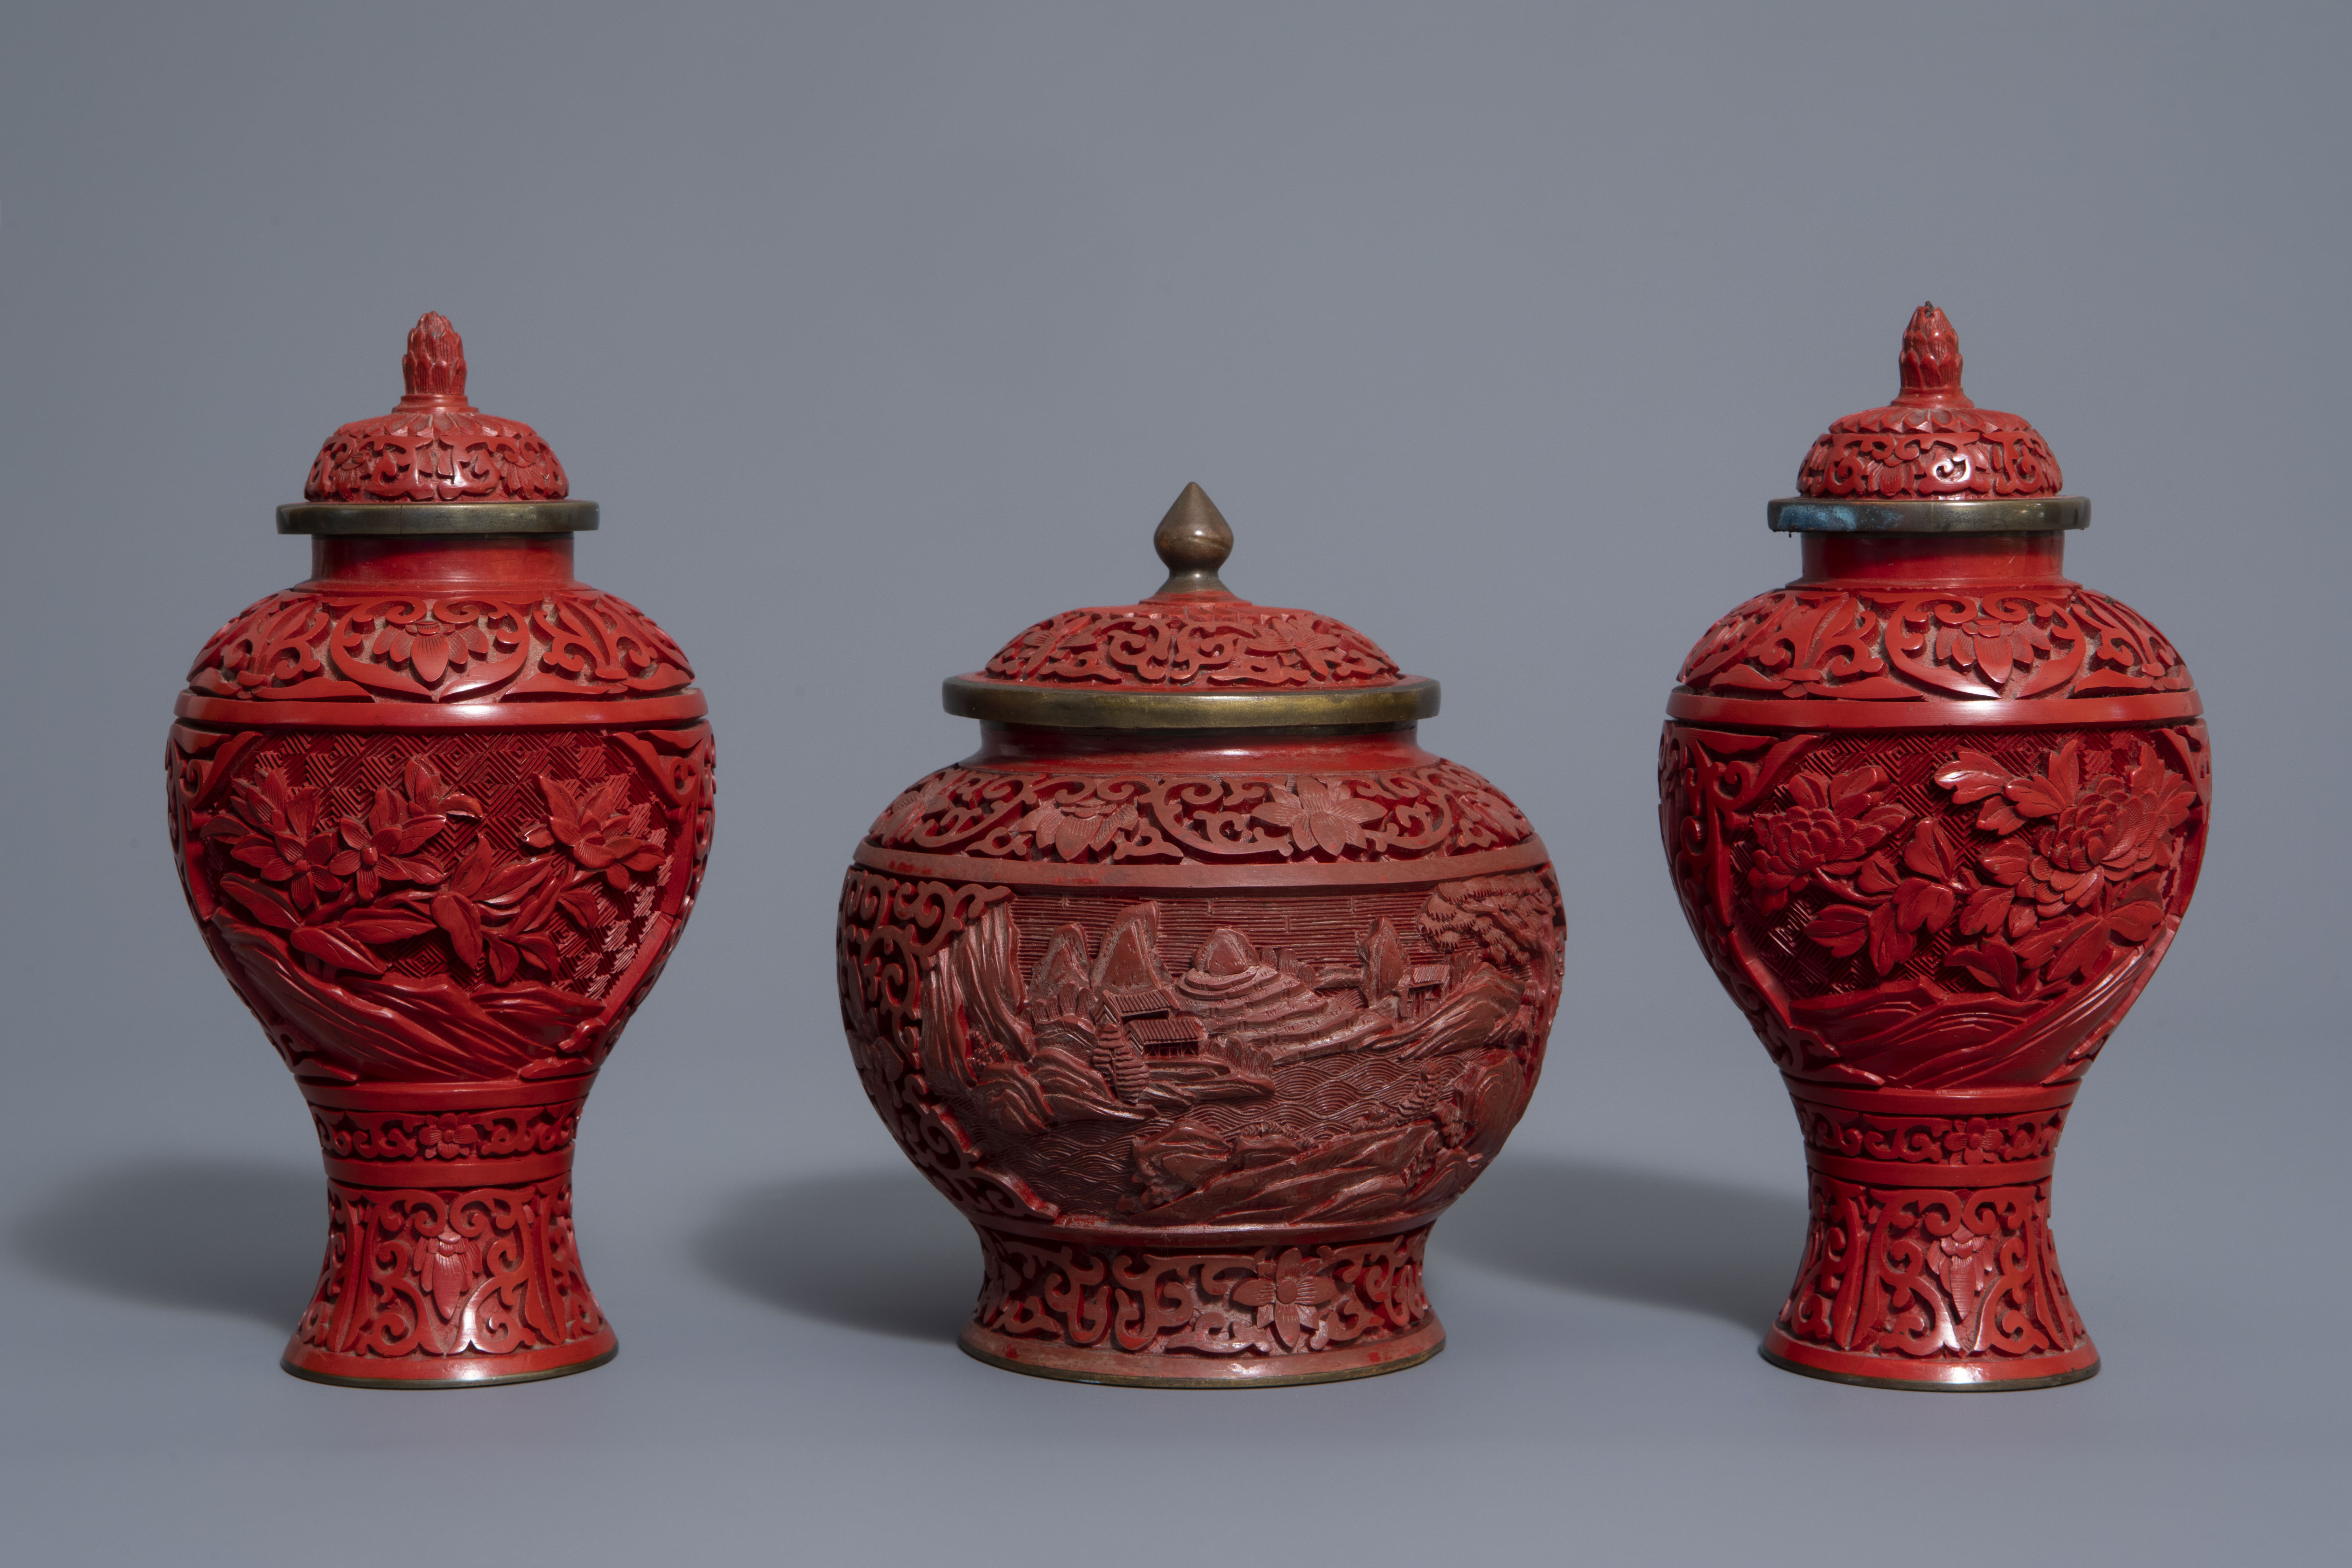 A Chinese tea block, cloisonné teapot, wall vase, bamboo brush pot & 3 red lacquer vases, 20th C. - Image 4 of 16